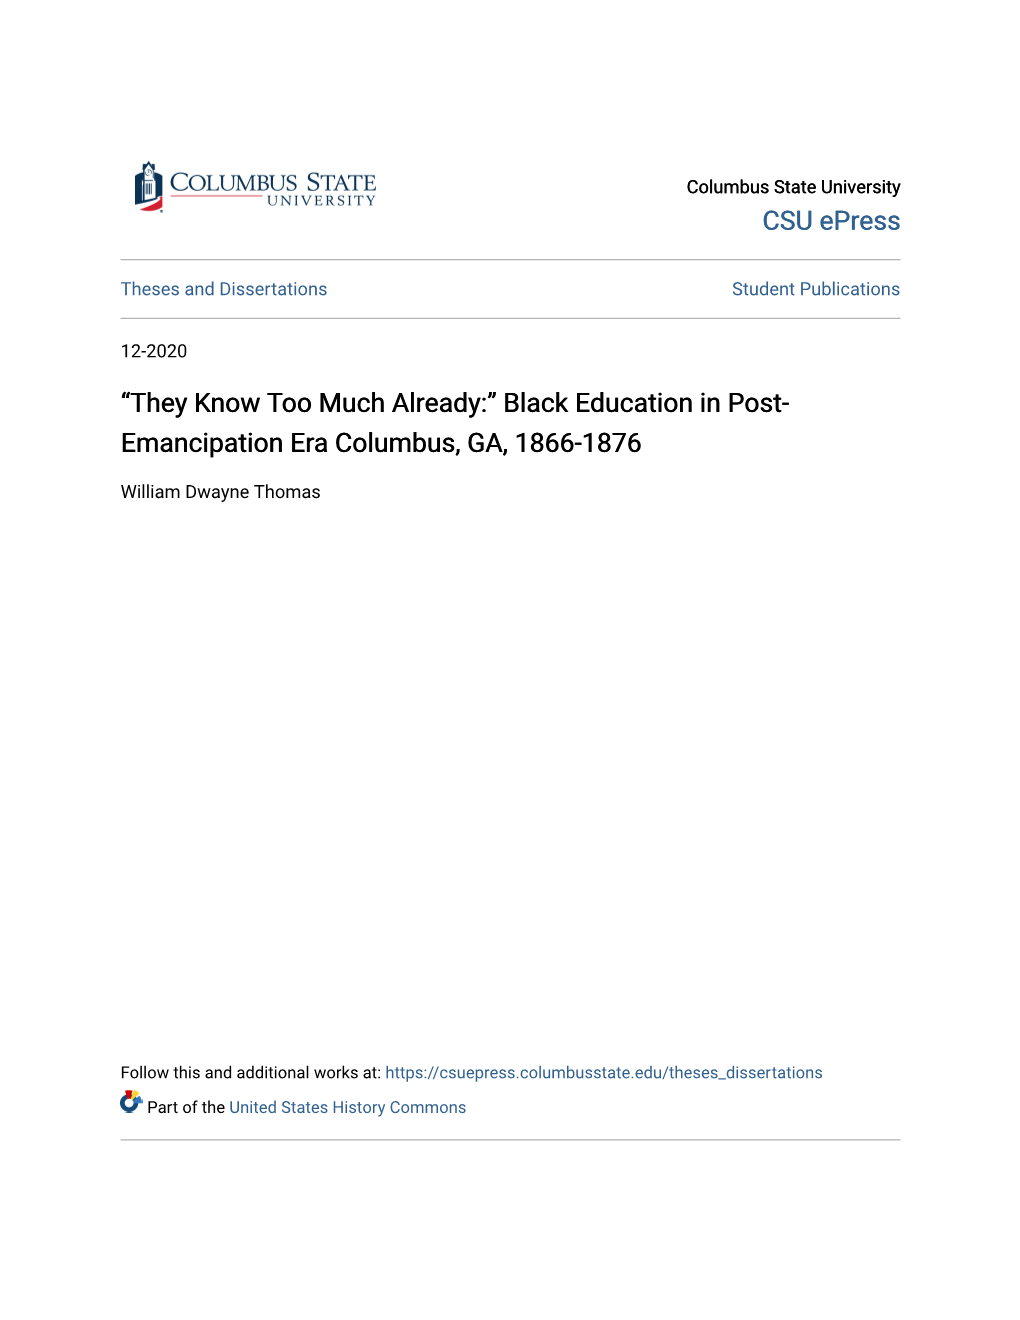 “They Know Too Much Already:” Black Education in Post-Emancipation